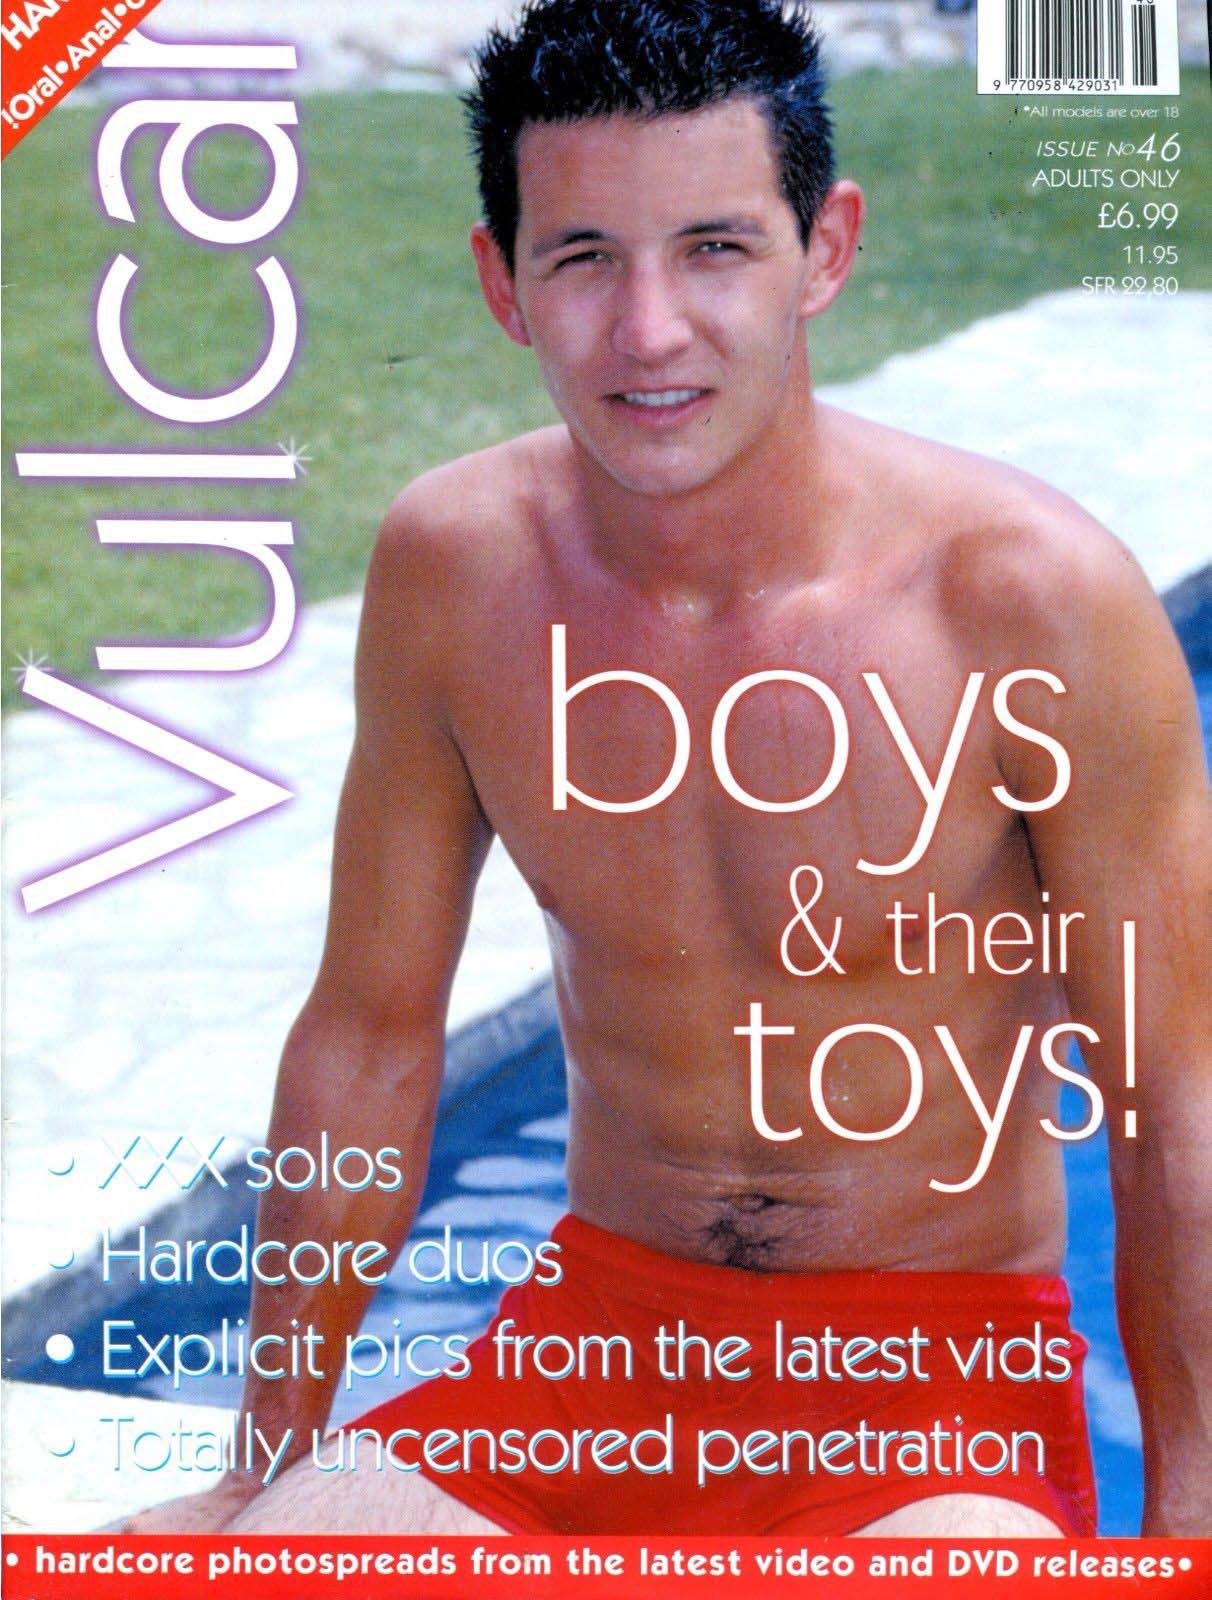 Vulcan # 46 magazine back issue Vulcan magizine back copy Vulcan # 46 Gay Adult Pornographic Magazine Back Issue Made Famous by Serial Killer Dennis Nilsen. Boys & Their Toys!.